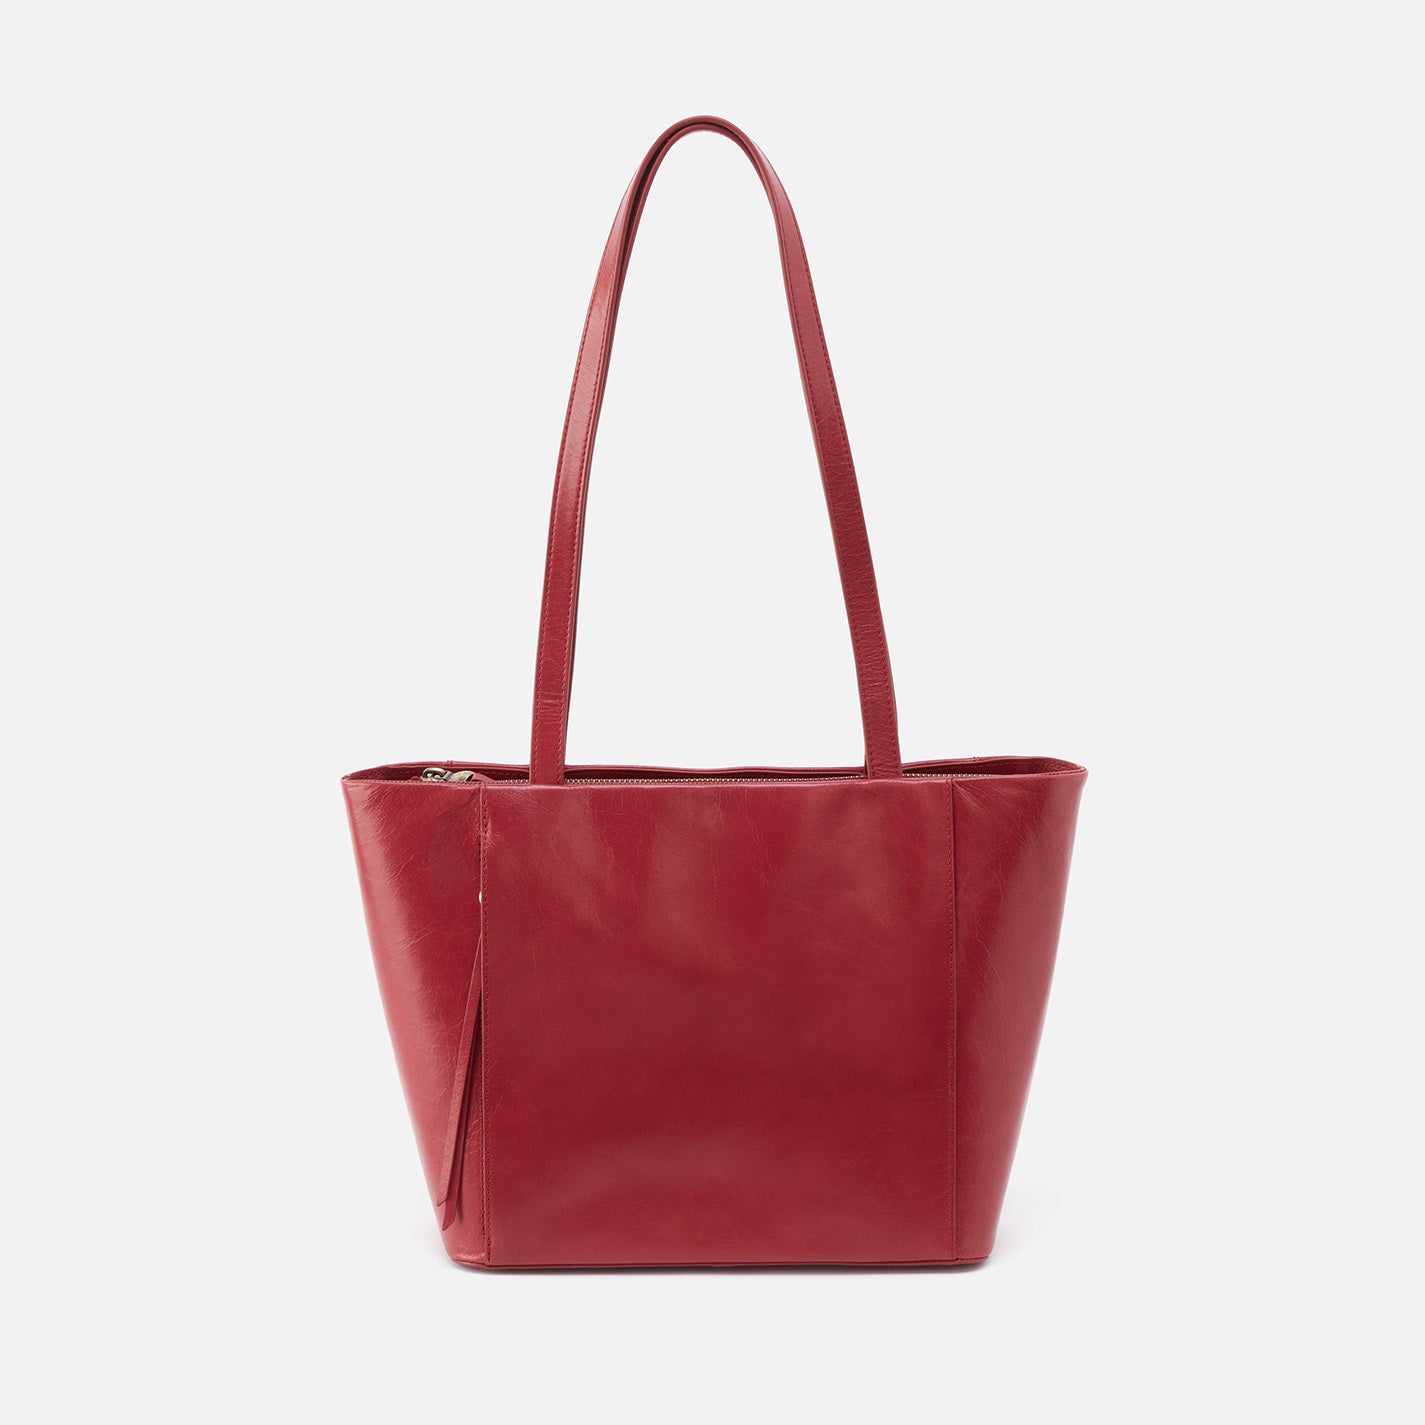 Haven Tote in Polished Leather - Cranberry – HOBO